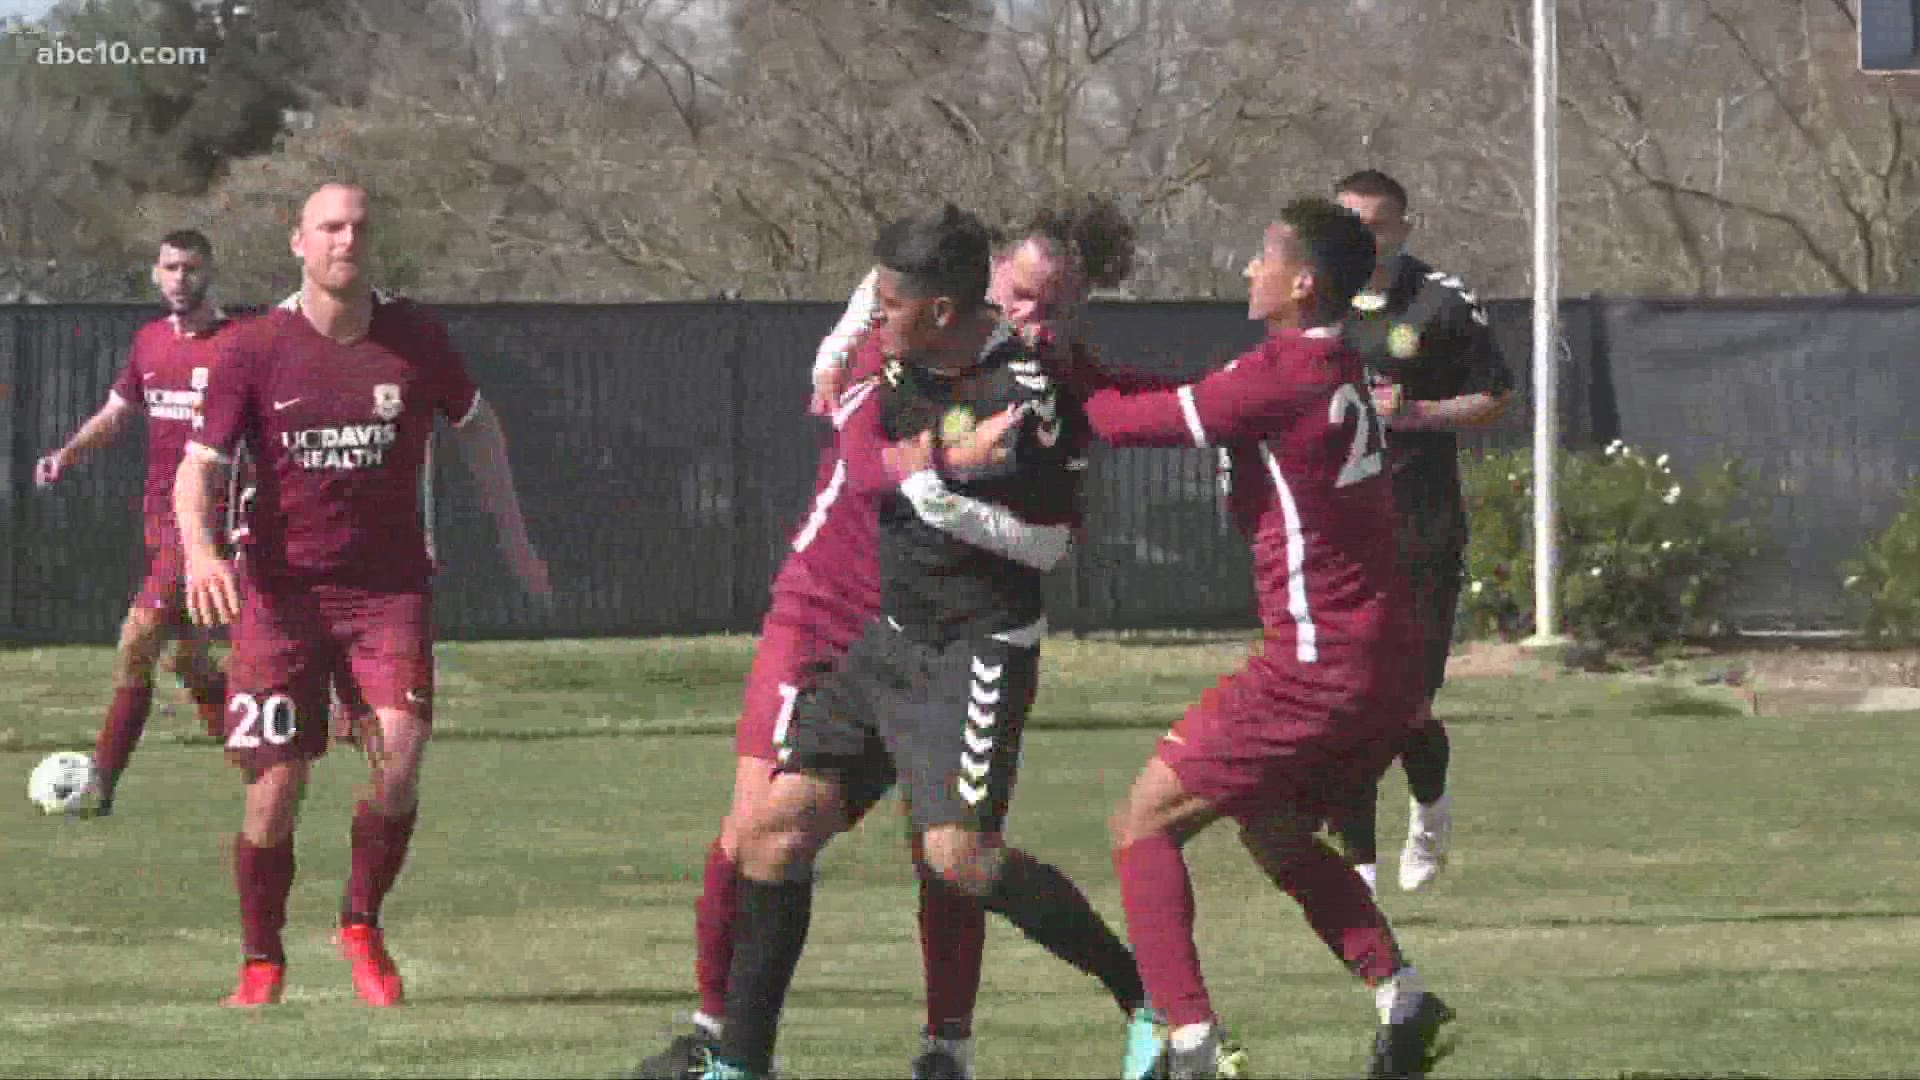 Sacramento Republic FC says their preseason scrimmage with Bay Cities FC of Redwood City got a little bit scrappy as an altercation ended the match early.